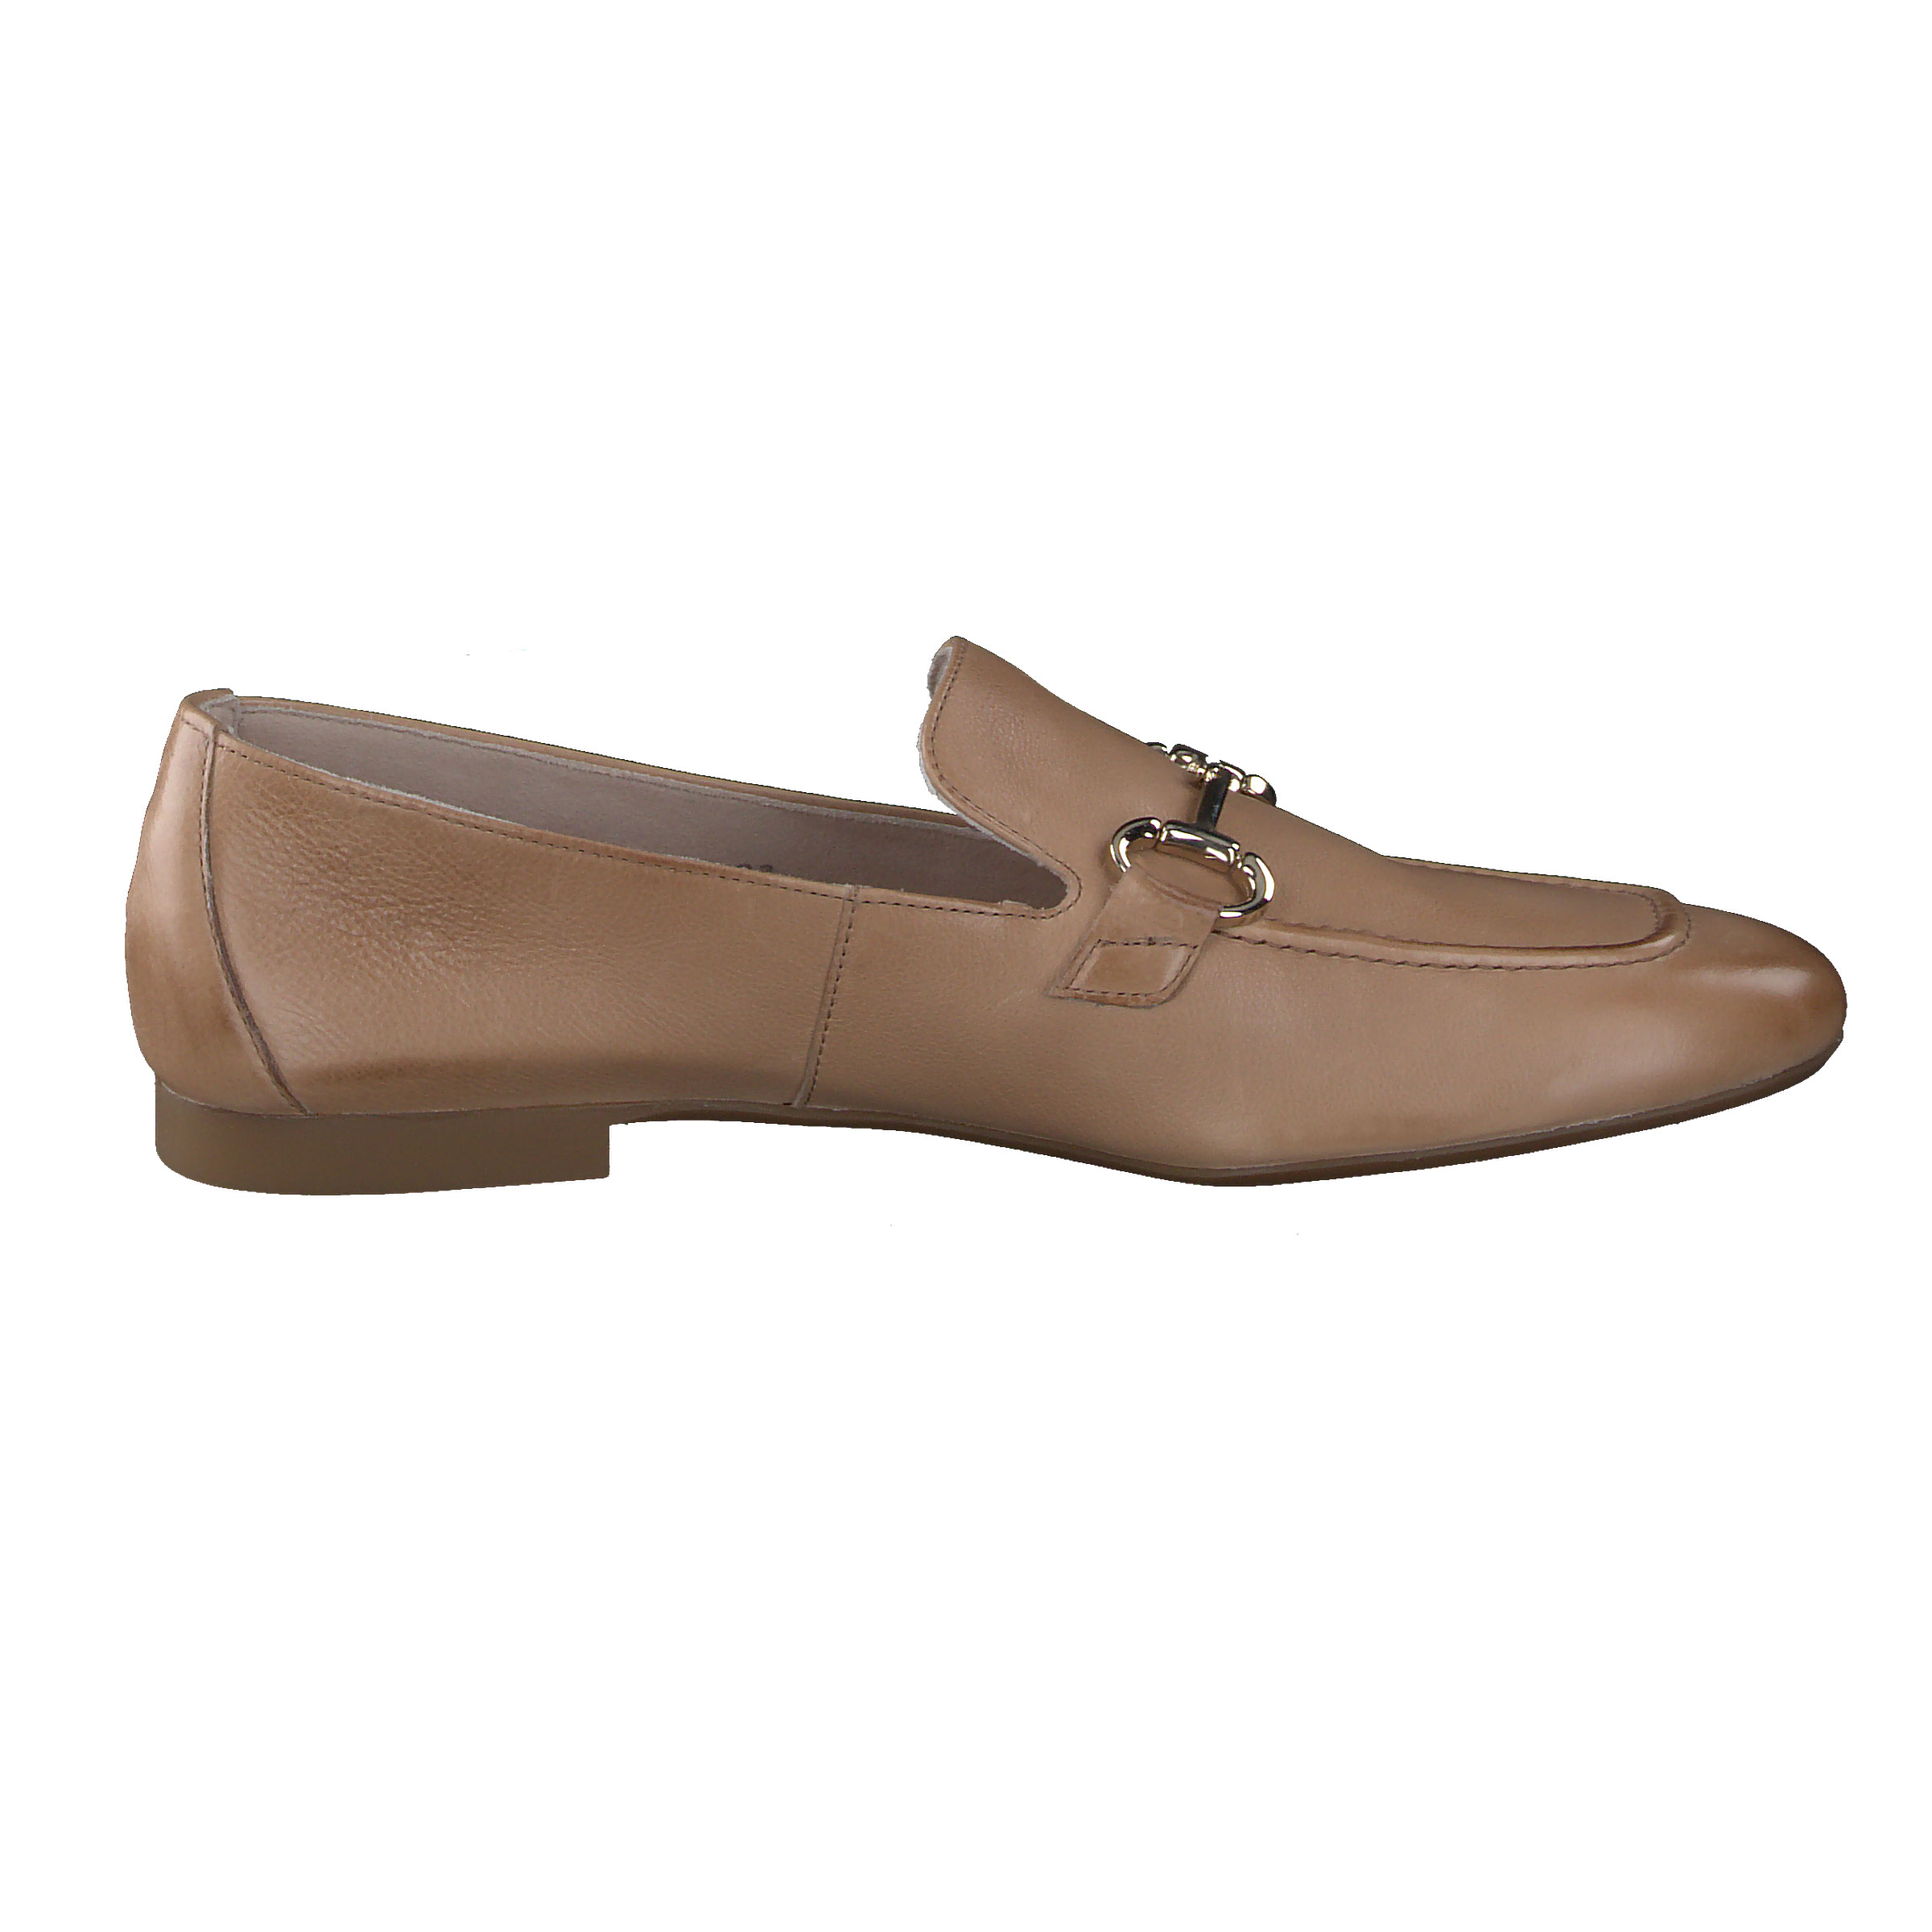 Paul Green Super Soft Loafer - Beige smooth leather